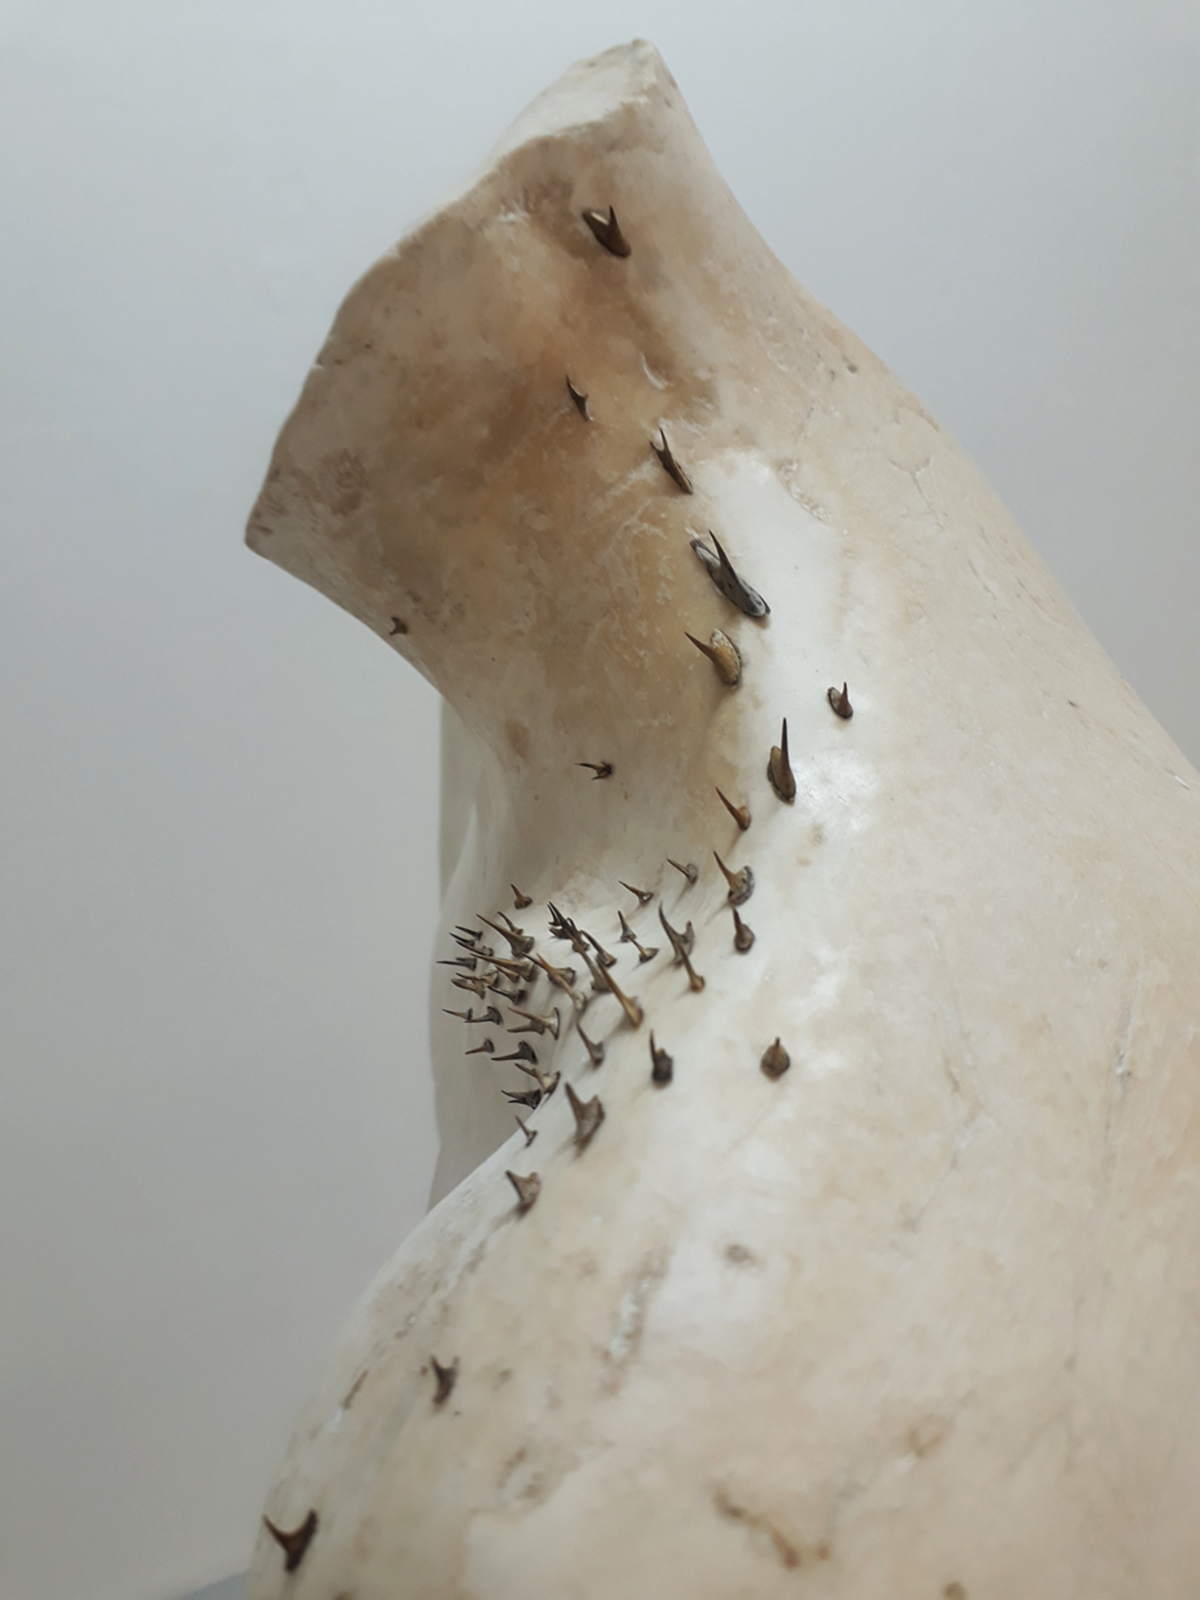 Detail of an abstract sculpture made off plaster and decorated with thorns.